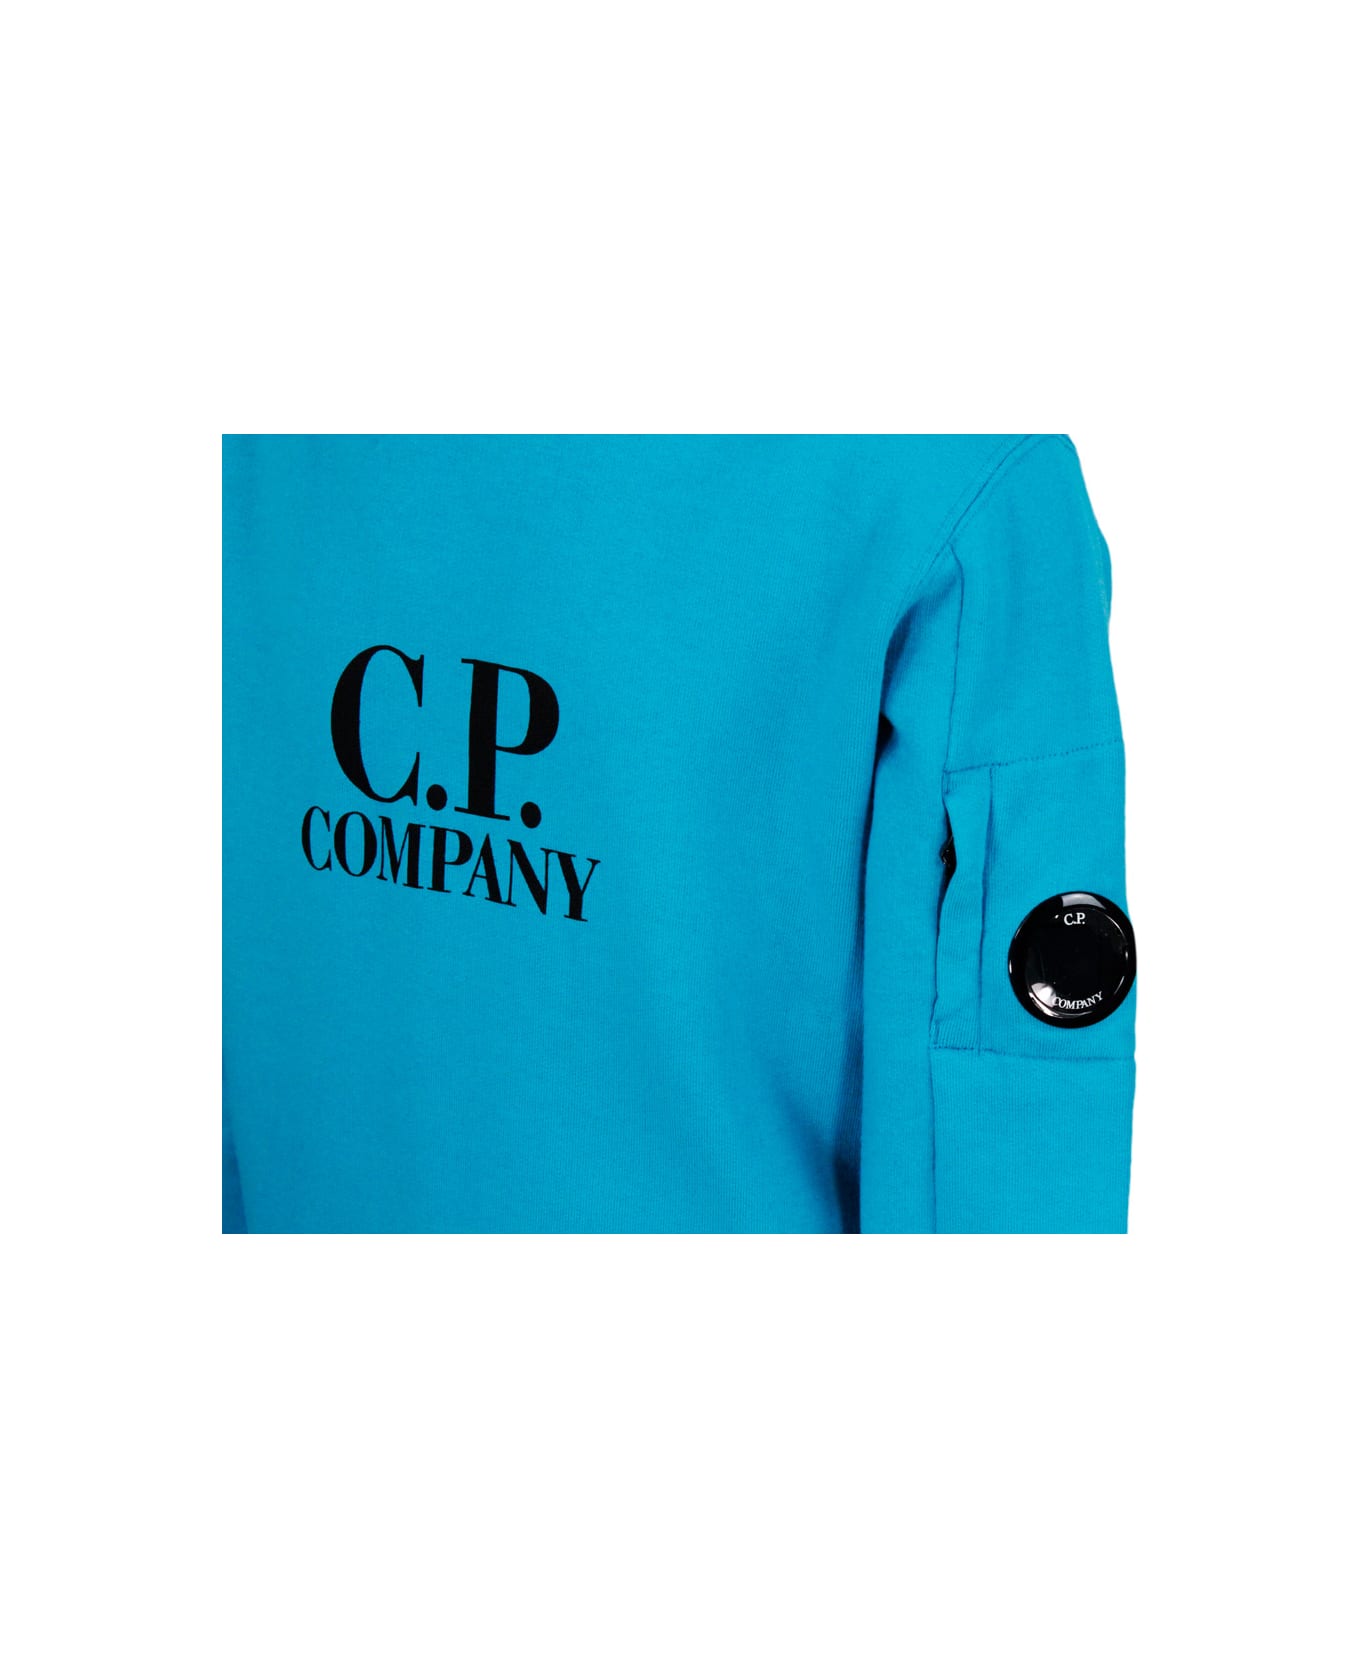 C.P. Company Long-sleeved Crewneck Sweatshirt In Breathable Cotton Fleece With Logo On The Chest And Eyeglass Lens On The Shoulder - Blu royal ニットウェア＆スウェットシャツ